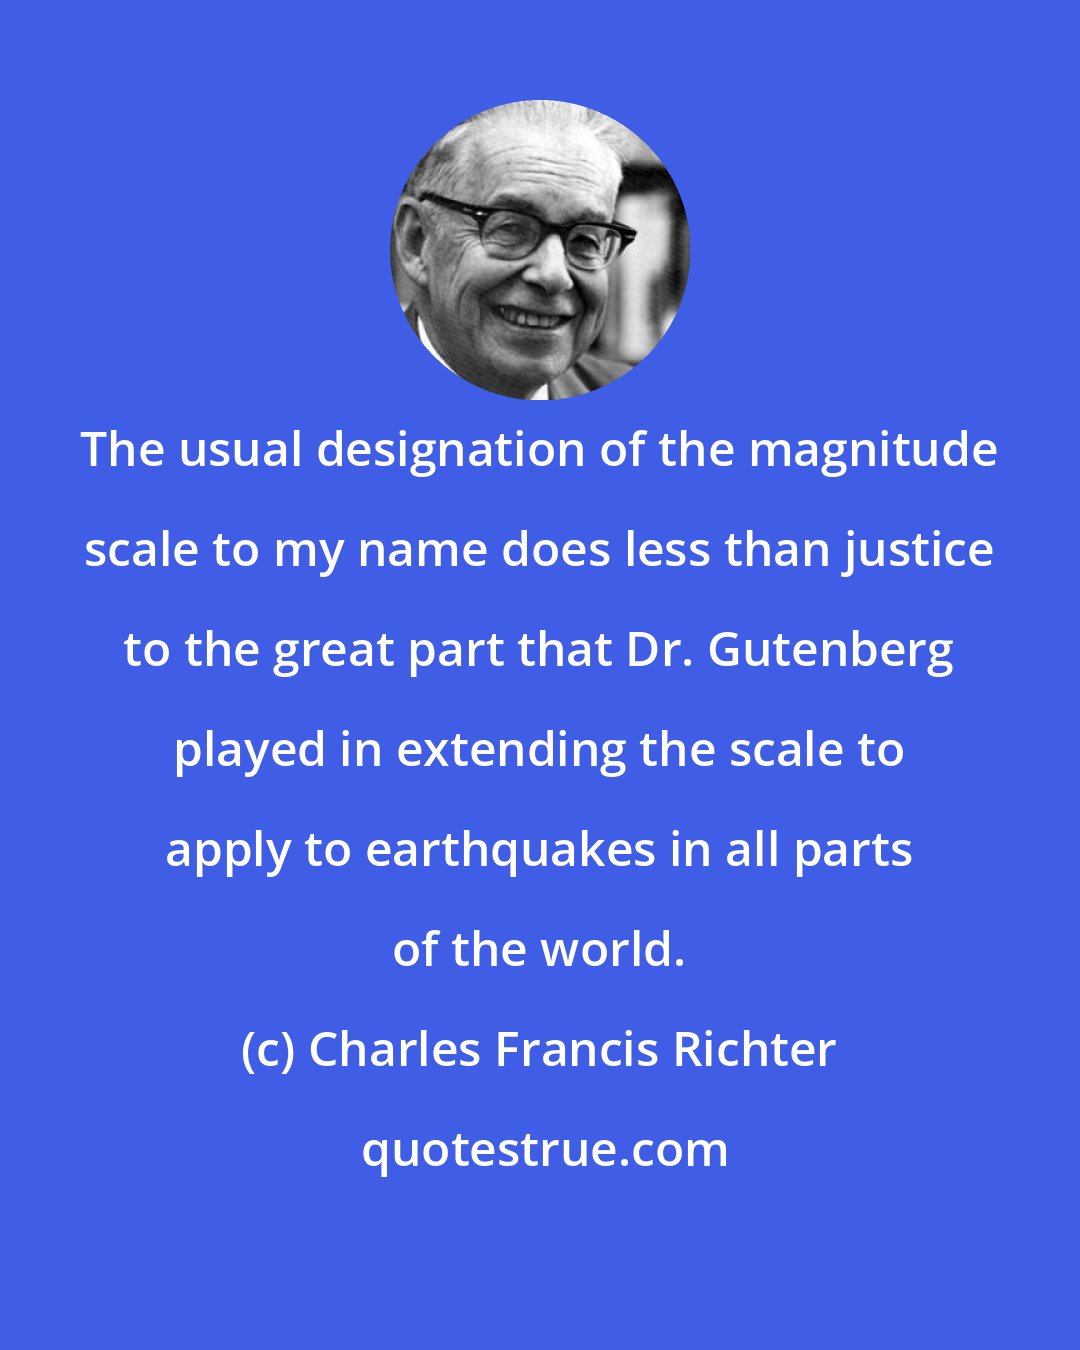 Charles Francis Richter: The usual designation of the magnitude scale to my name does less than justice to the great part that Dr. Gutenberg played in extending the scale to apply to earthquakes in all parts of the world.